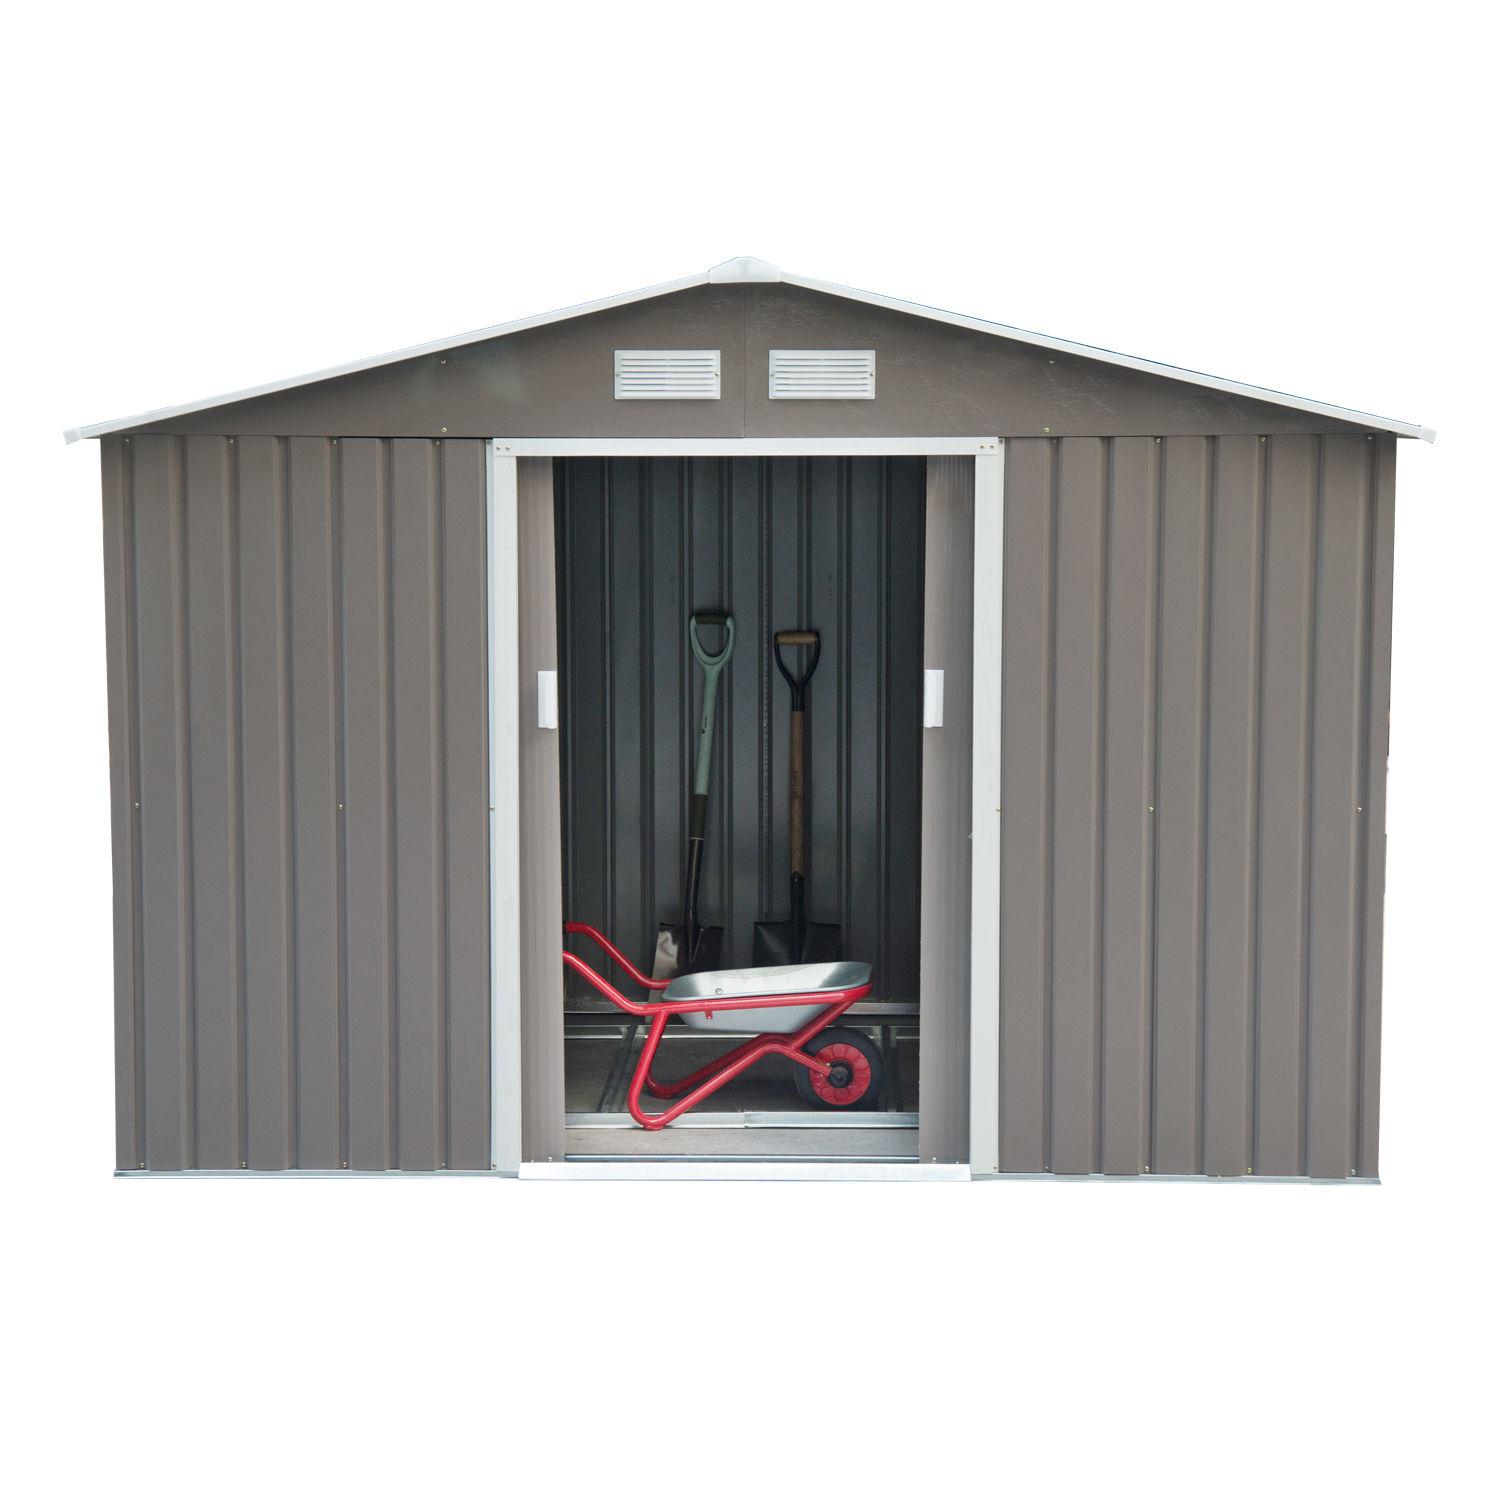 Outsunny 9' x 6' Metal Outdoor Utility Storage Tool Shed, 6.3 ft x 9.1 ft, Grey - image 4 of 11